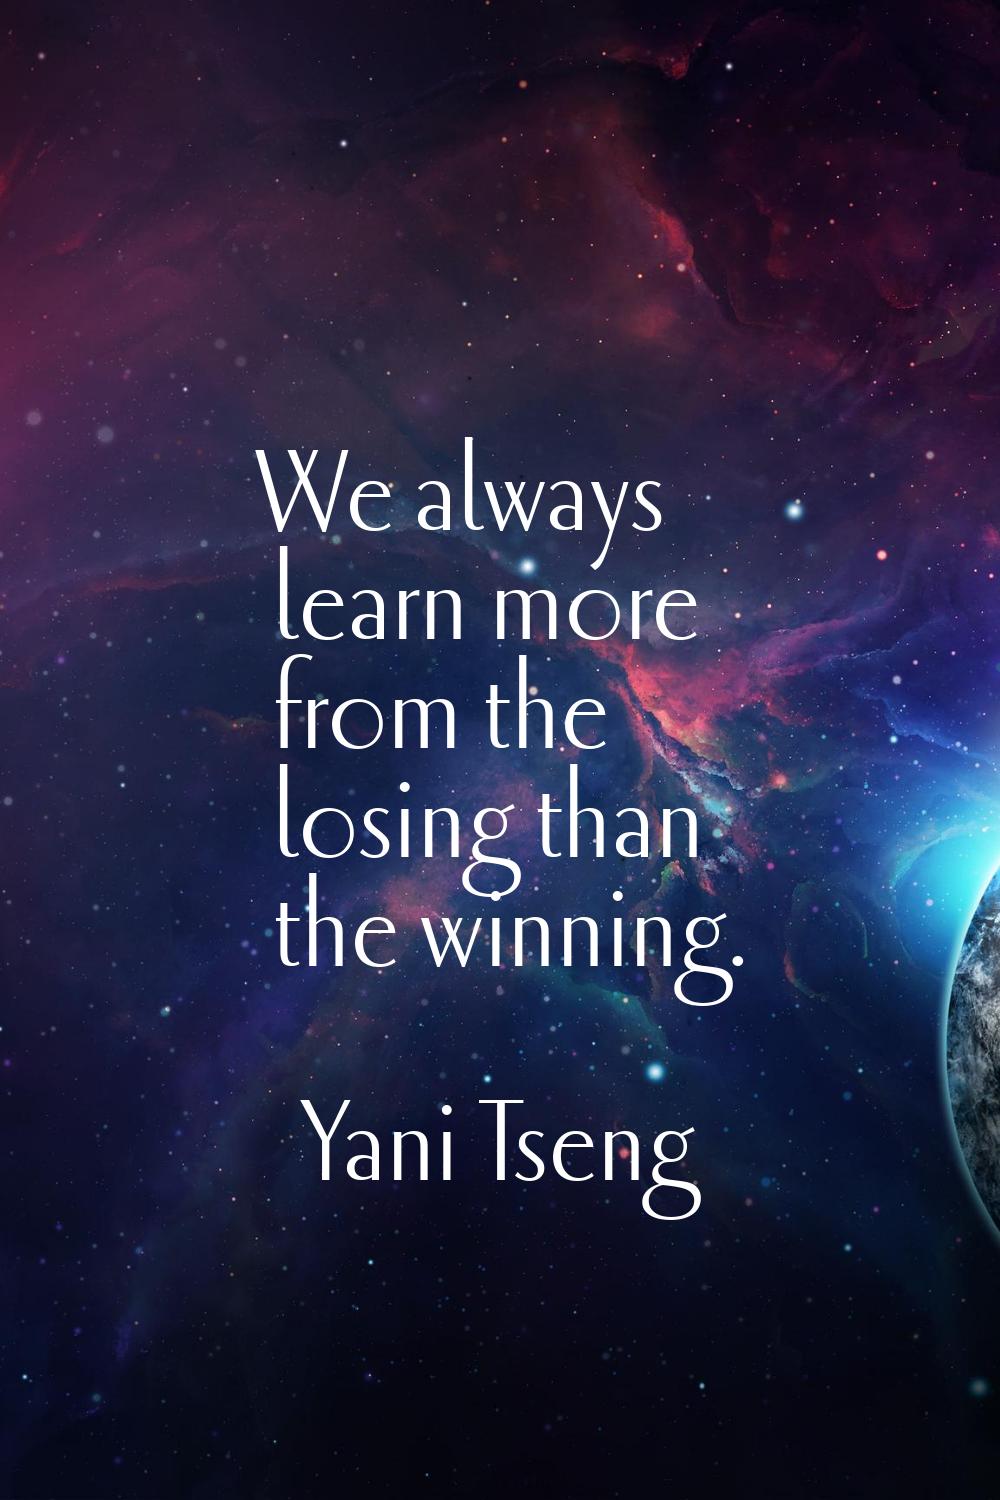 We always learn more from the losing than the winning.